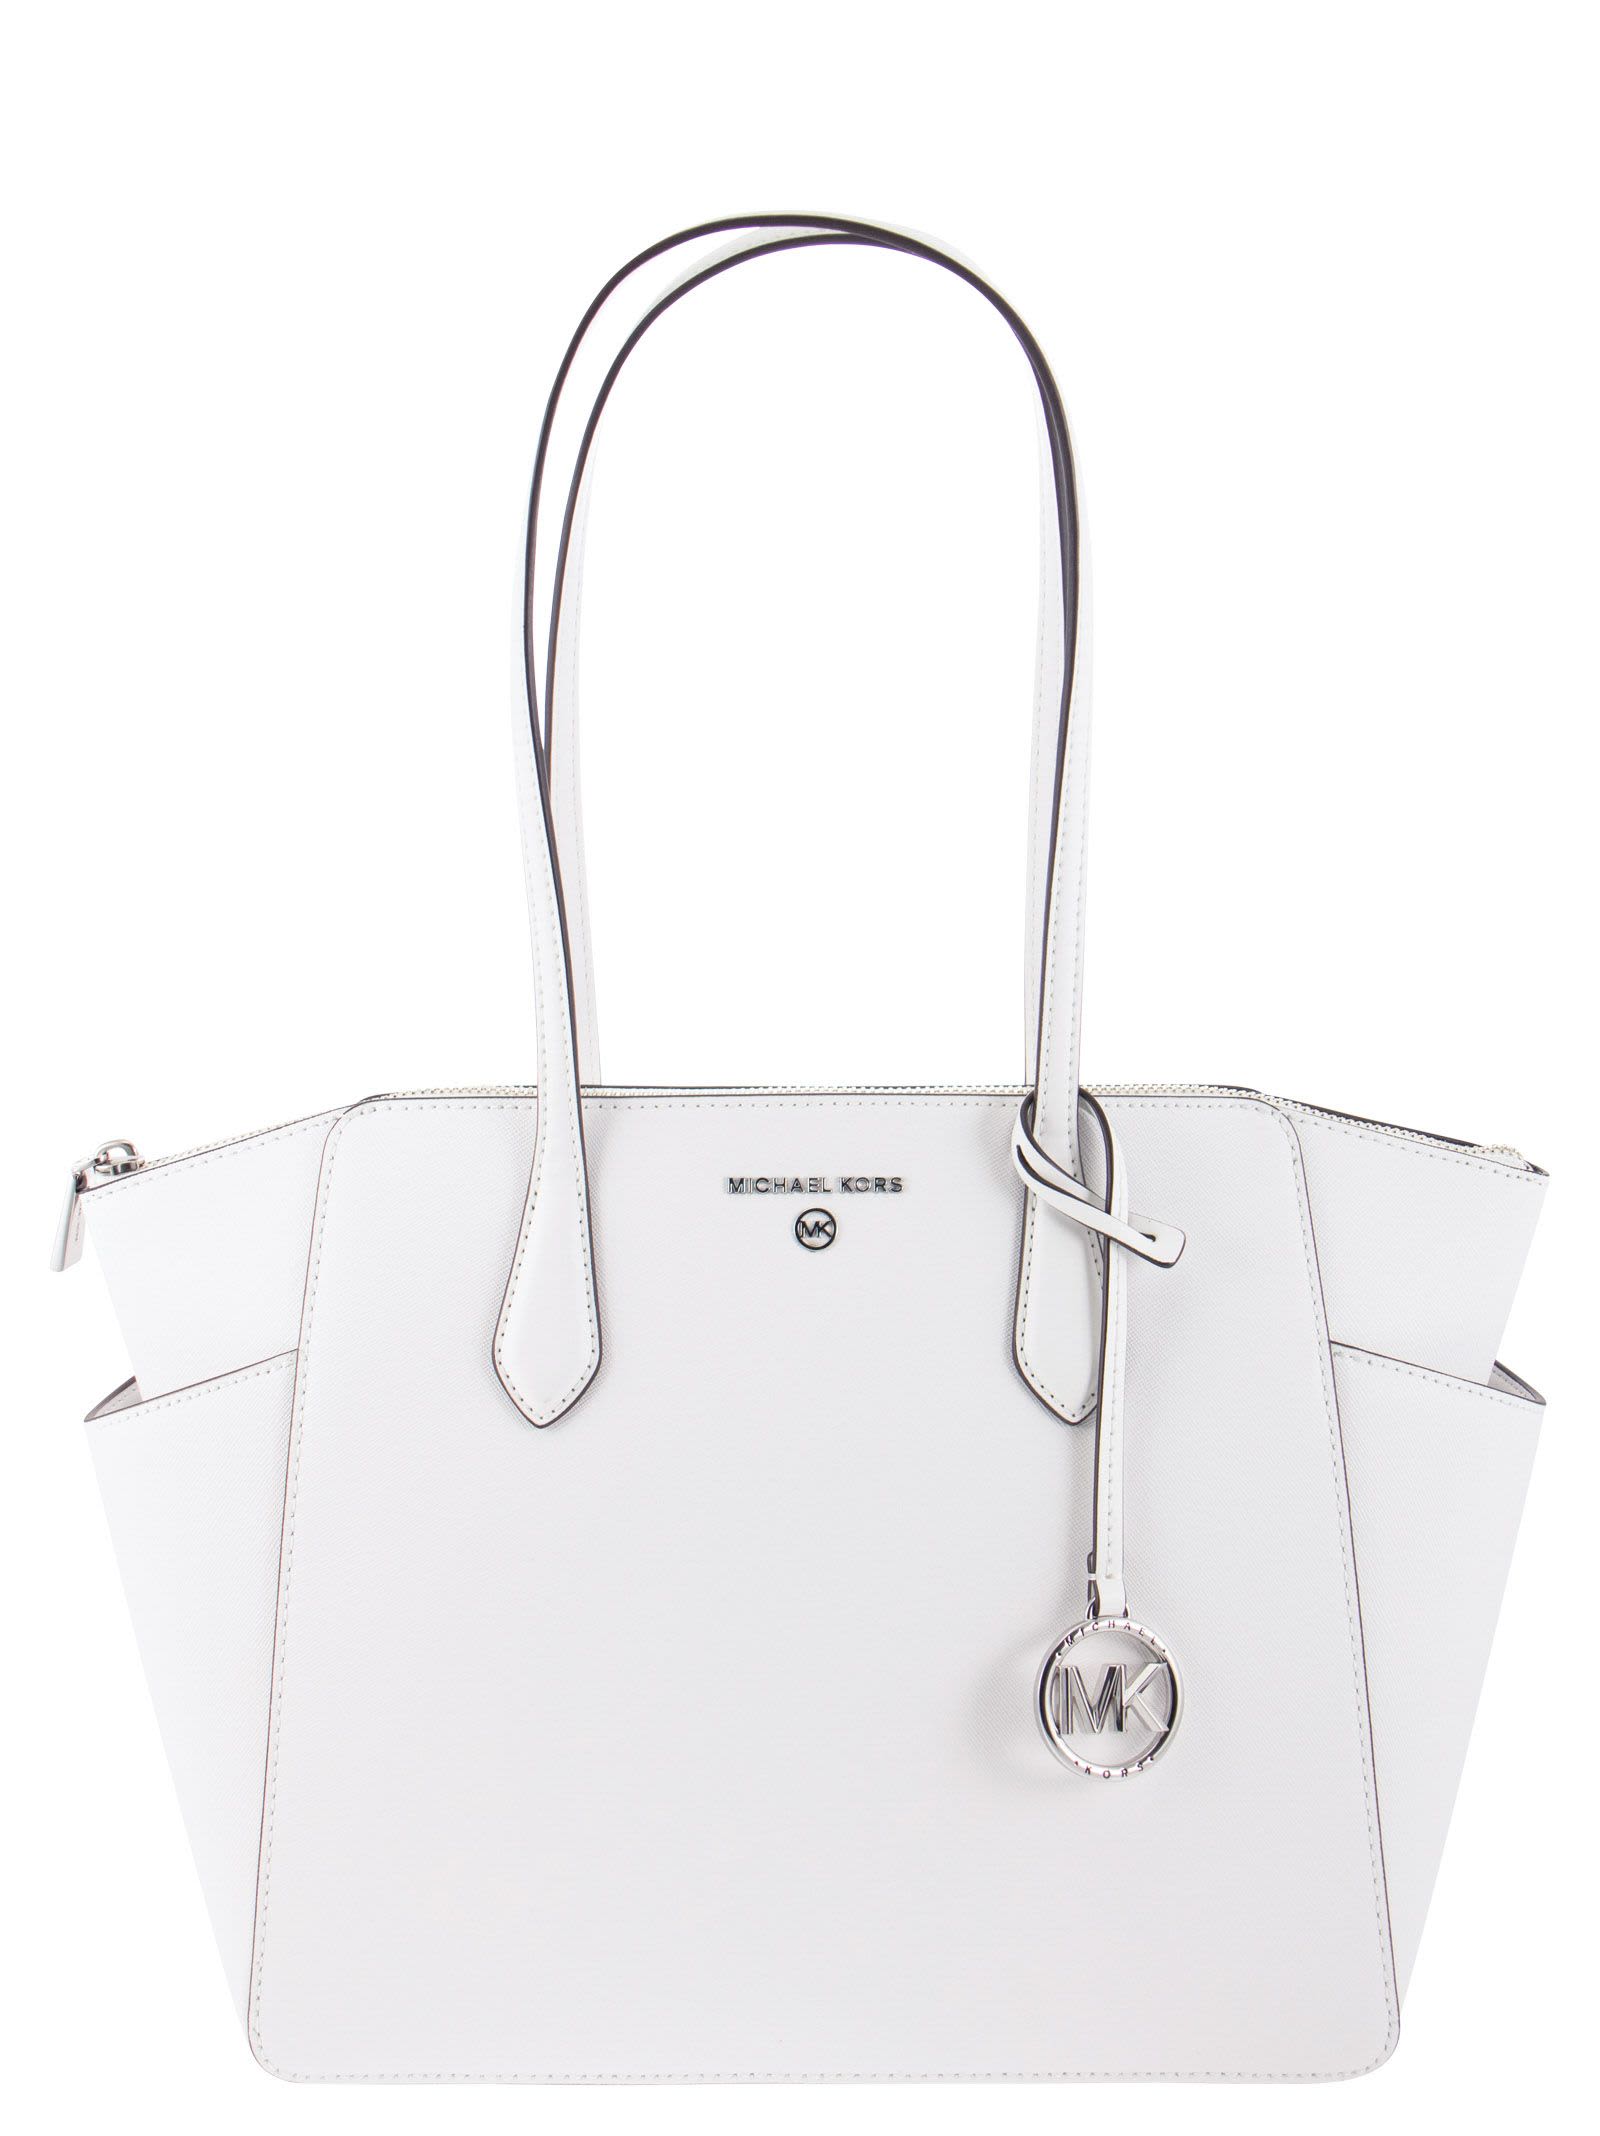 MICHAEL MICHAEL KORS Voyager Large Saffiano Leather Tote Bag Optic White  NWT